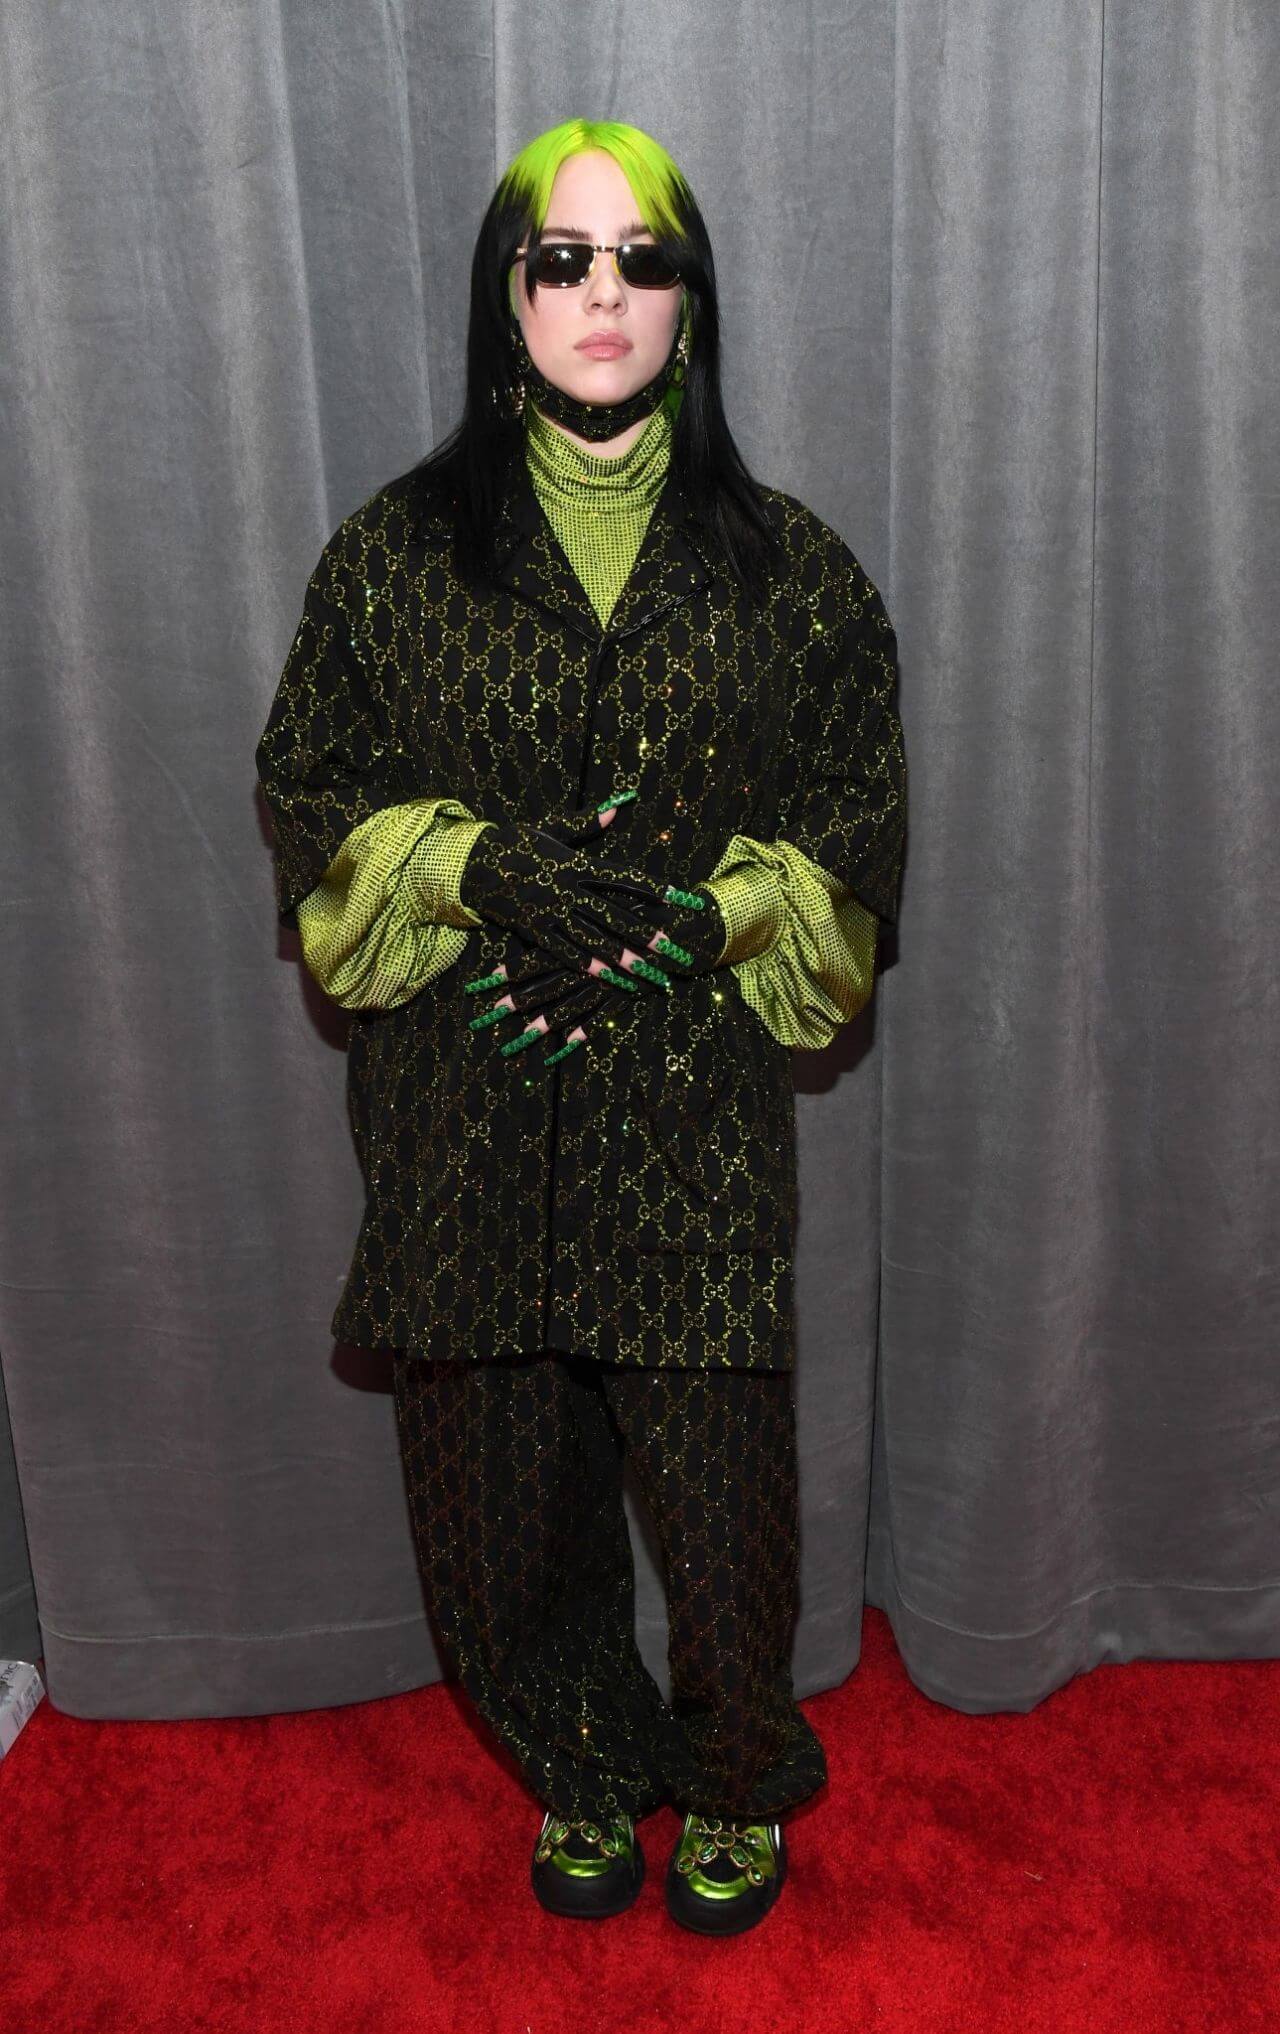 Billie Eilish  In Olive Green Shimmery Baggy Sleeves Coat With Pants At GRAMMY Awards